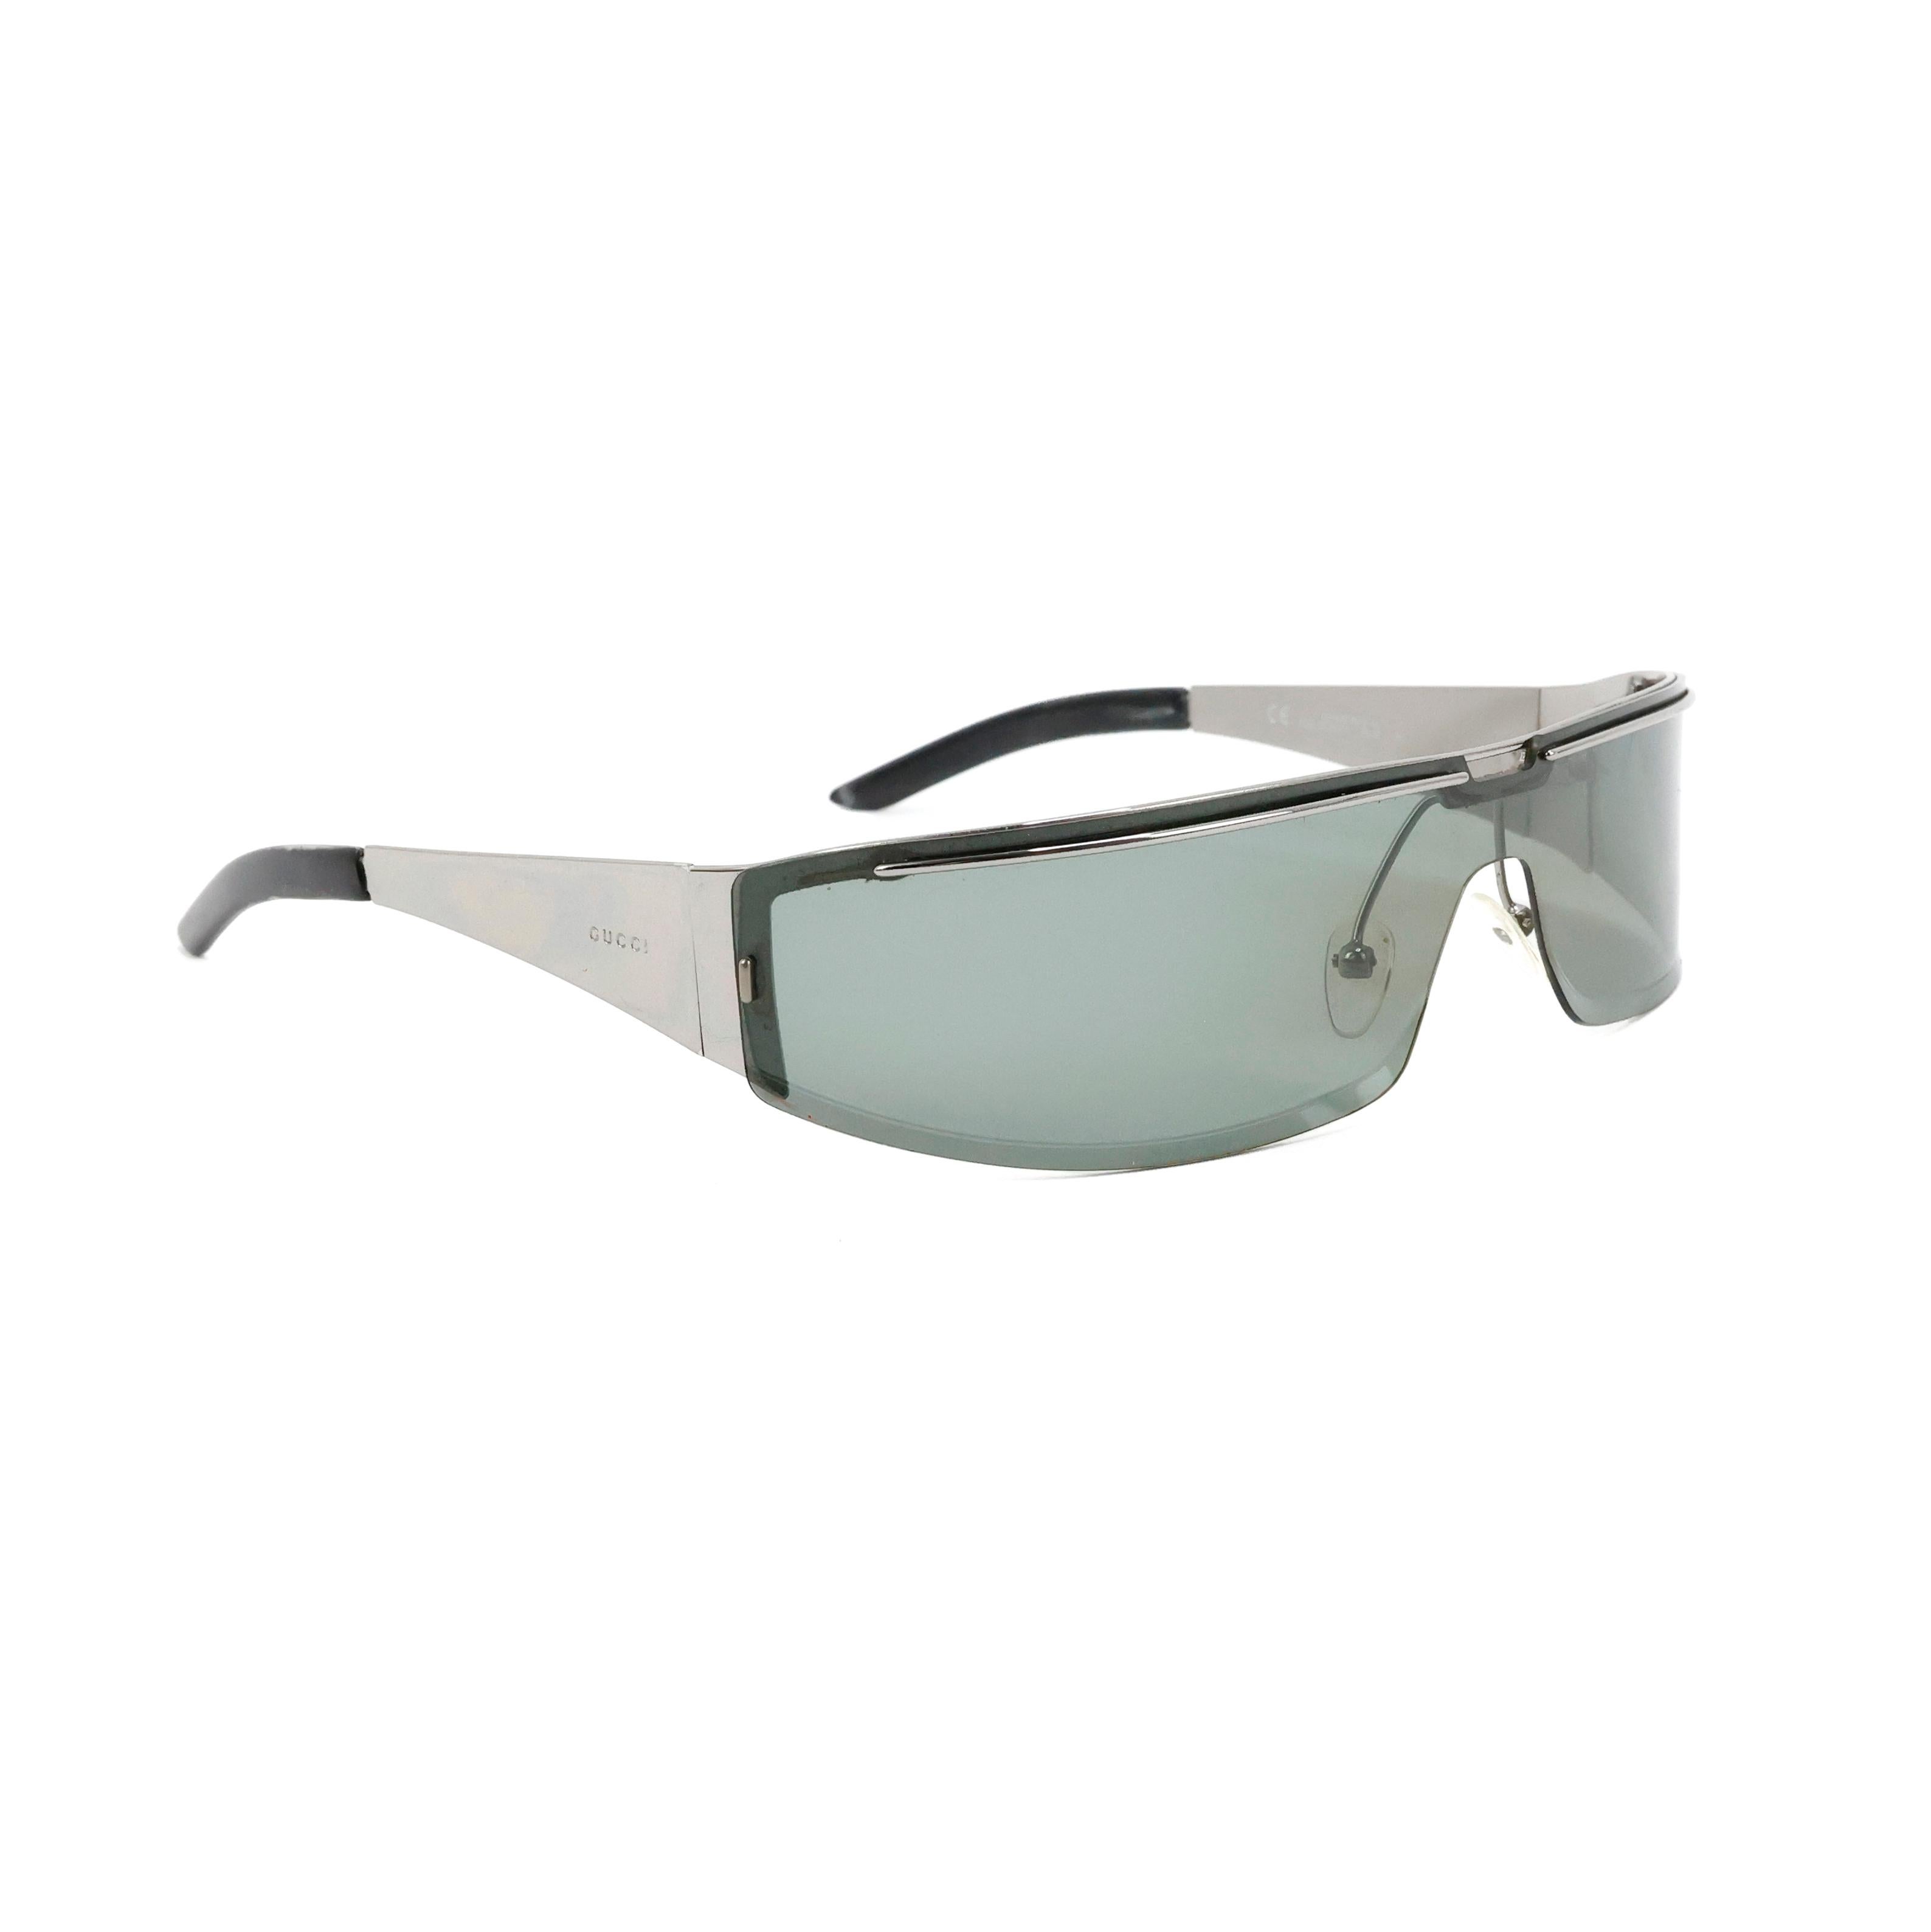 Gucci by Tom Ford full lens mask metallic sunglasses color silver.


Condition:
Good. Note: many slight scratches on lens, (that do not bother the use).


Packing/accessories:
Case.